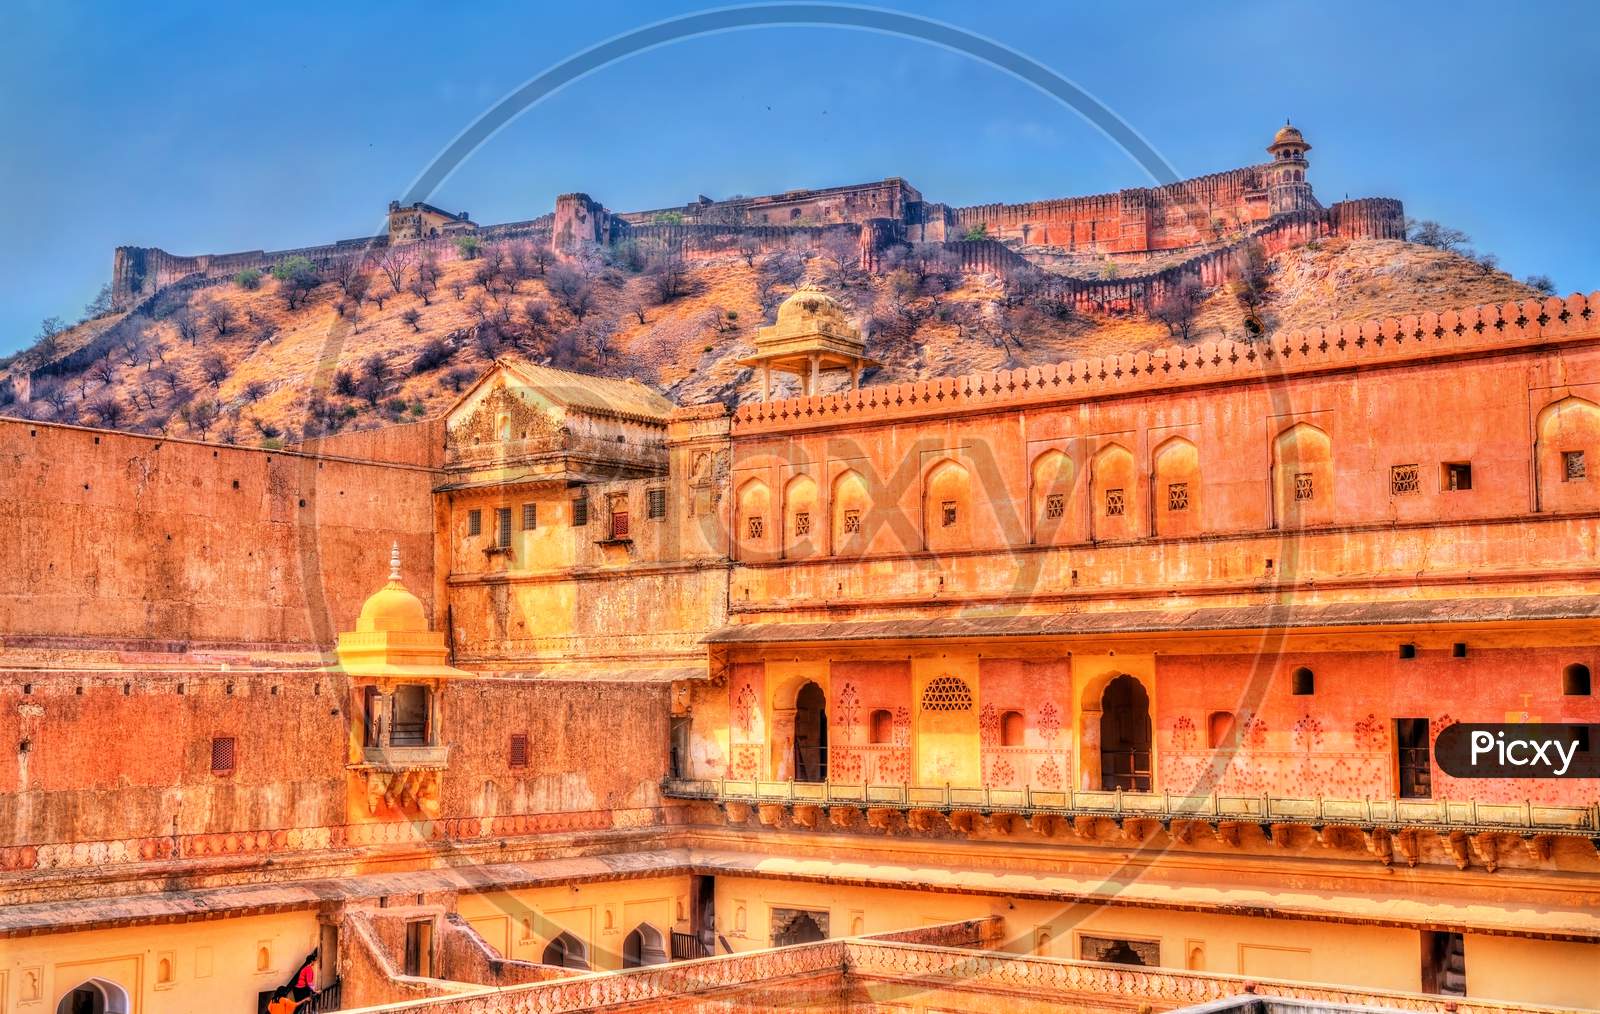 View Of Amer And Jaigarh Forts In Jaipur - Rajasthan, India